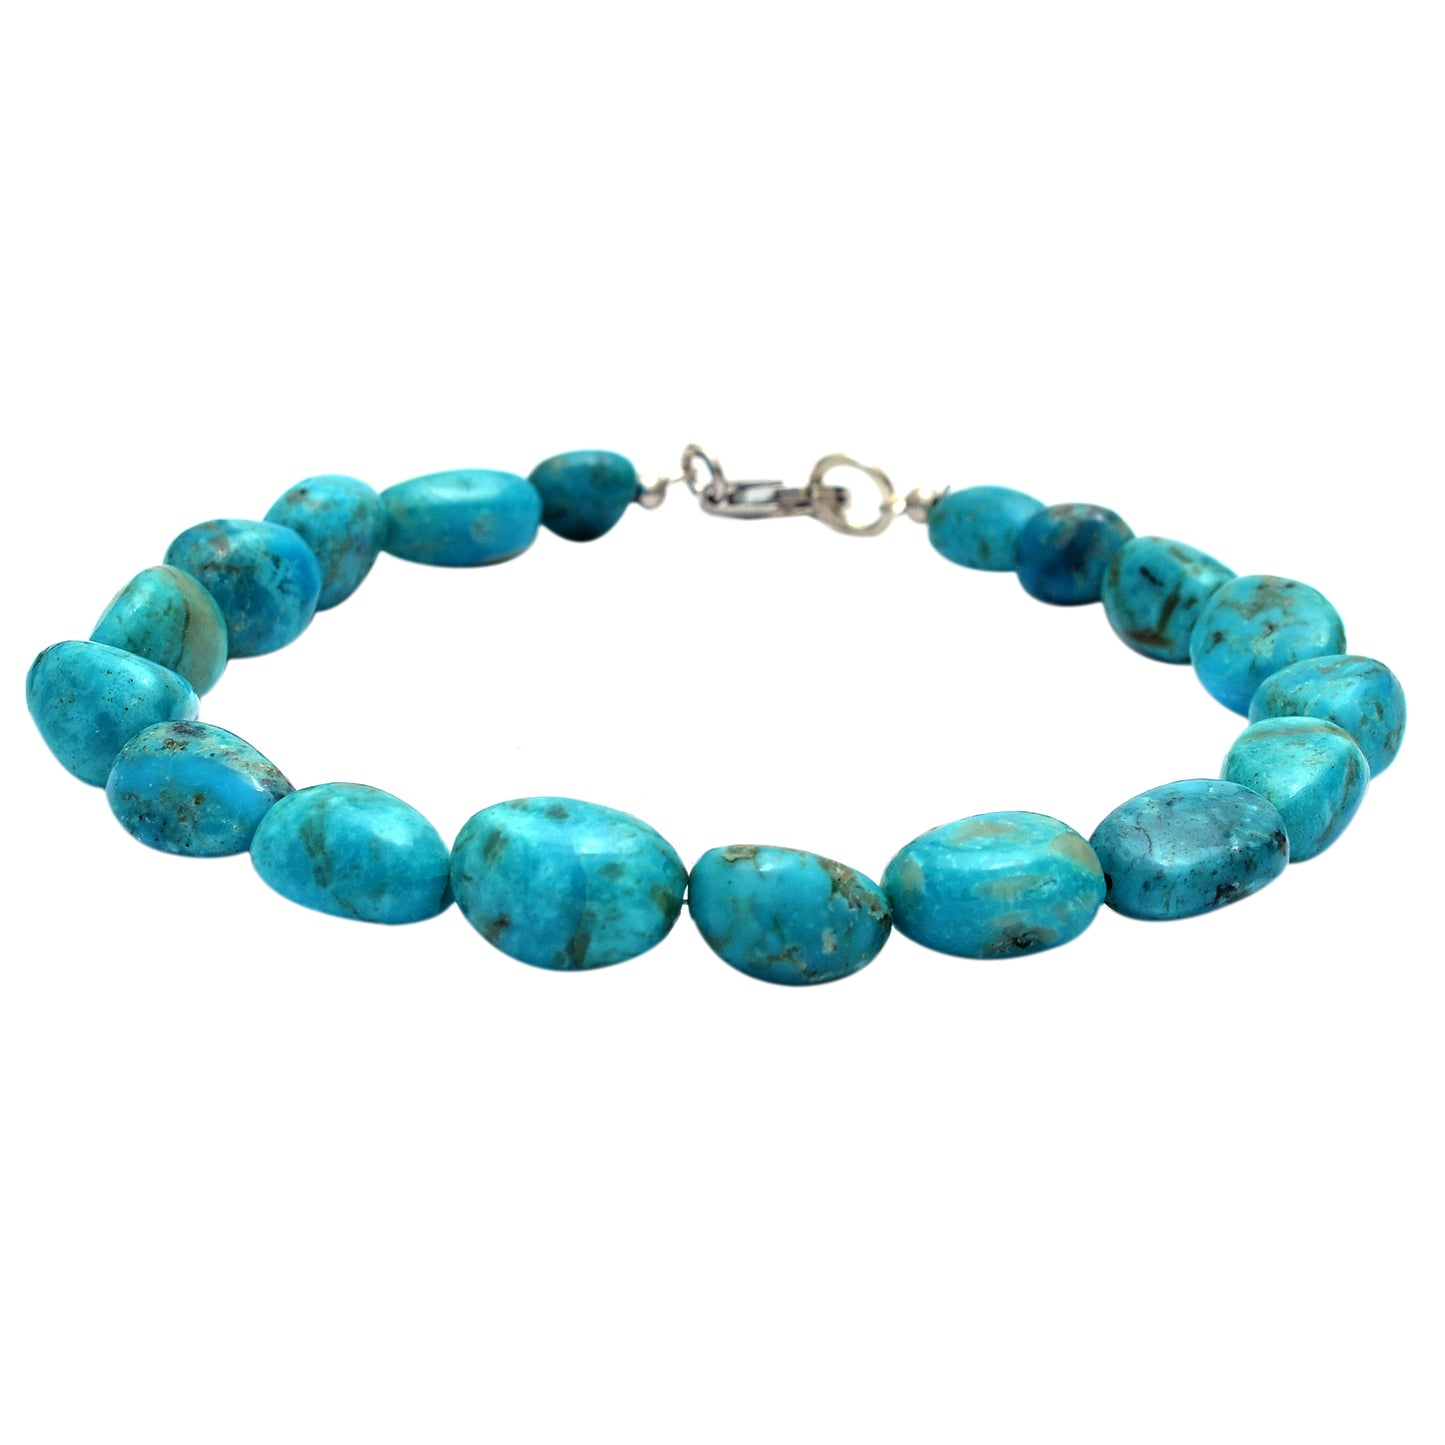 Natural Turquoise Nuggets Bead Bracelet has Sterling Silver Clasp